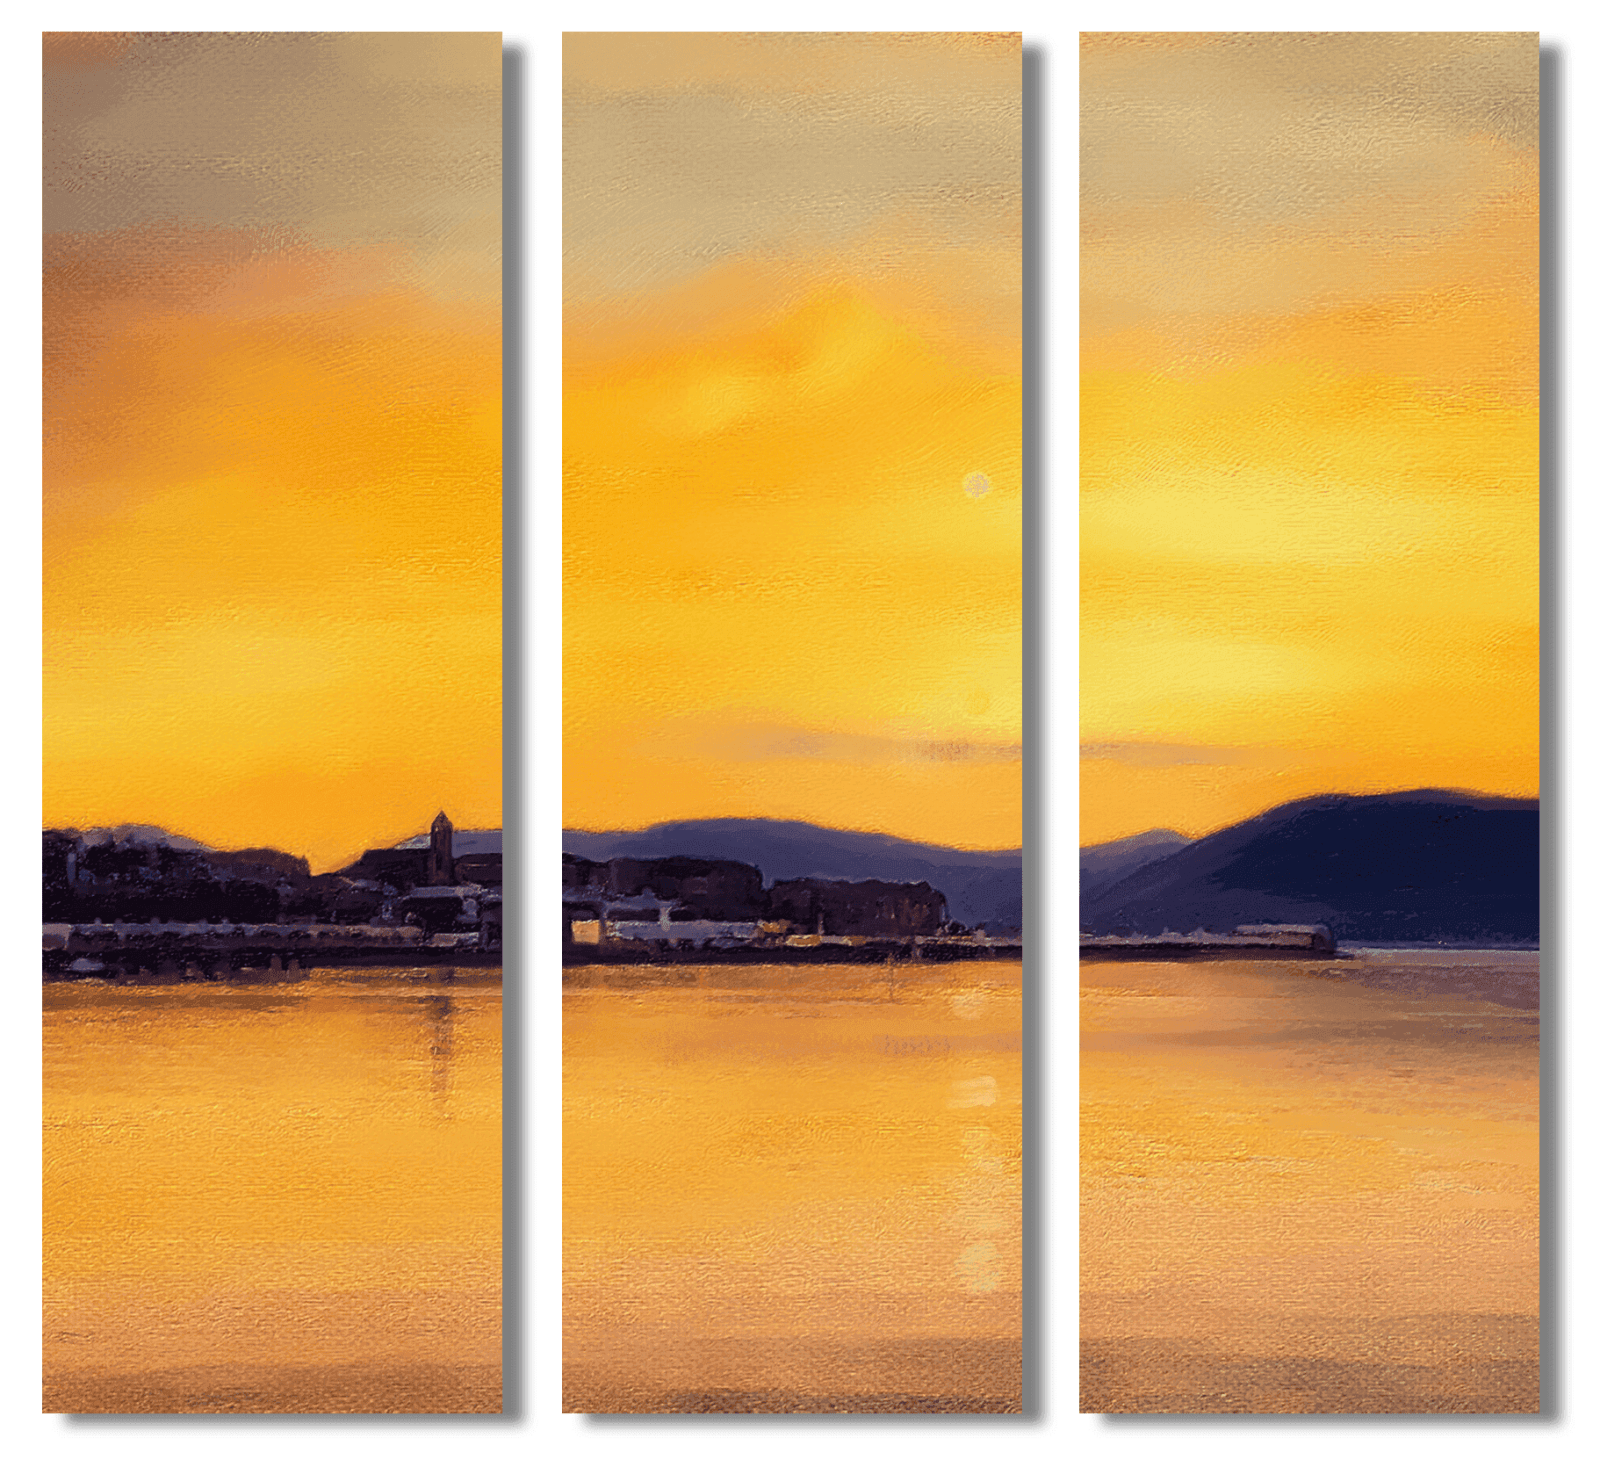 Gourock From Cardwell Bay Painting Signed Fine Art Triptych Canvas-Statement Wall Art-River Clyde Art Gallery-Paintings, Prints, Homeware, Art Gifts From Scotland By Scottish Artist Kevin Hunter